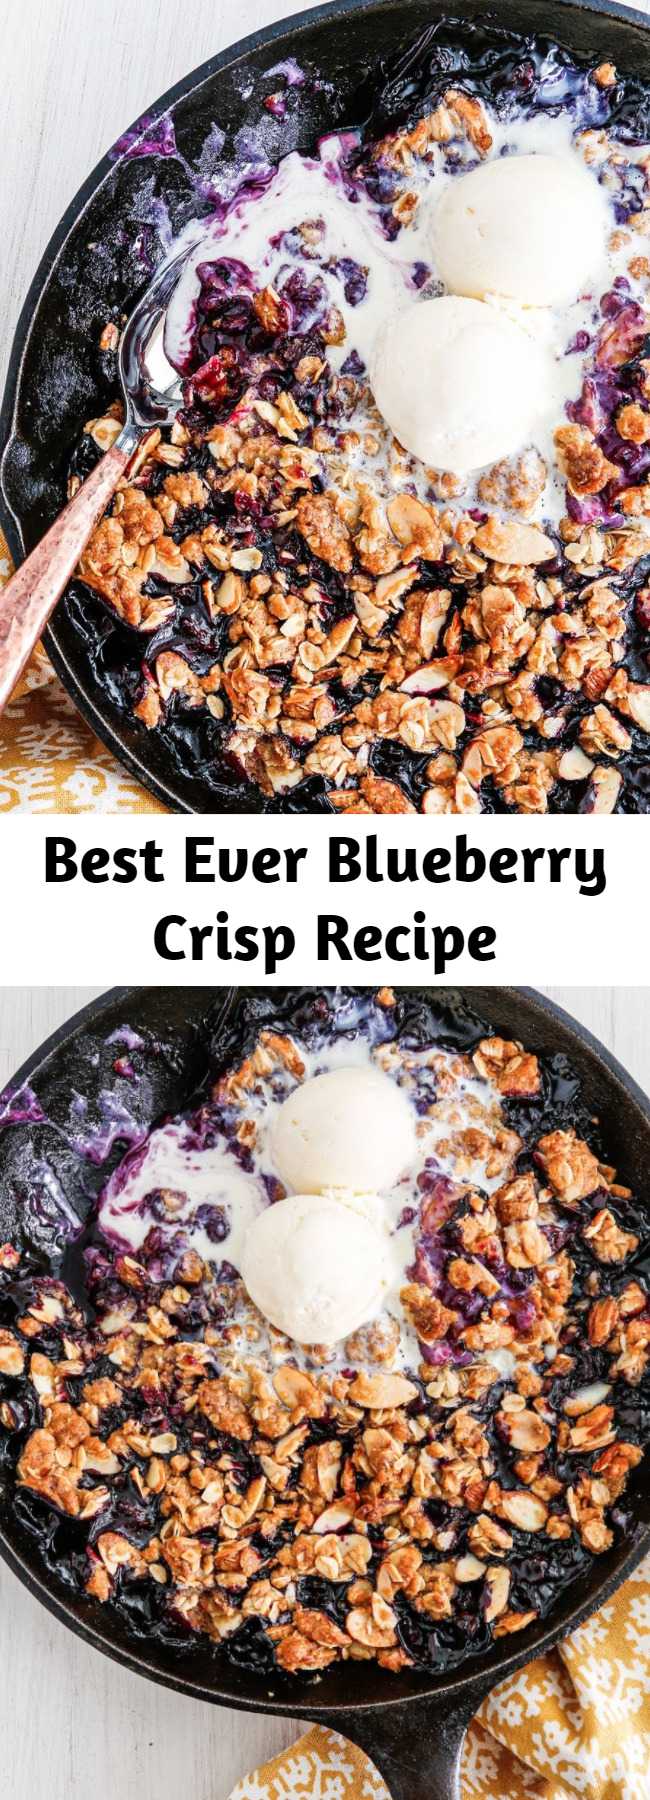 Best Ever Blueberry Crisp Recipe - This Blueberry Crisp has the jammiest filling topped with the crunchiest topping you've ever had.